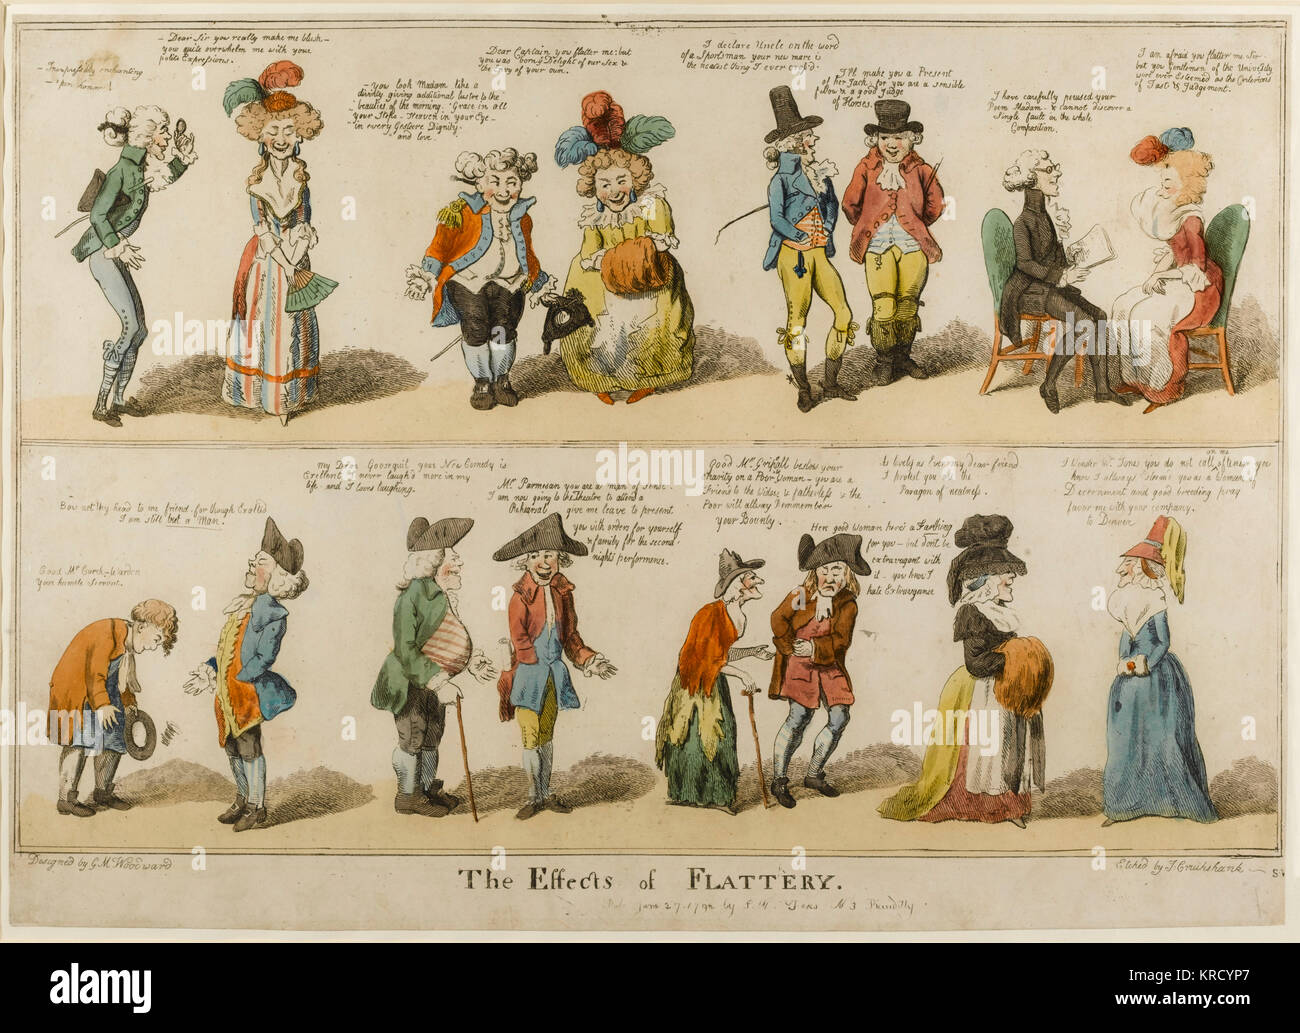 Satirical cartoon, The Effects of Flattery. One of a set of similar cartoons all titled 'The Effects of ...'  The print shows various pairs of people in conversation, arranged in two rows.  One person flatters while the other is taken in by the flattery and compliments.     Date: 1792 Stock Photo